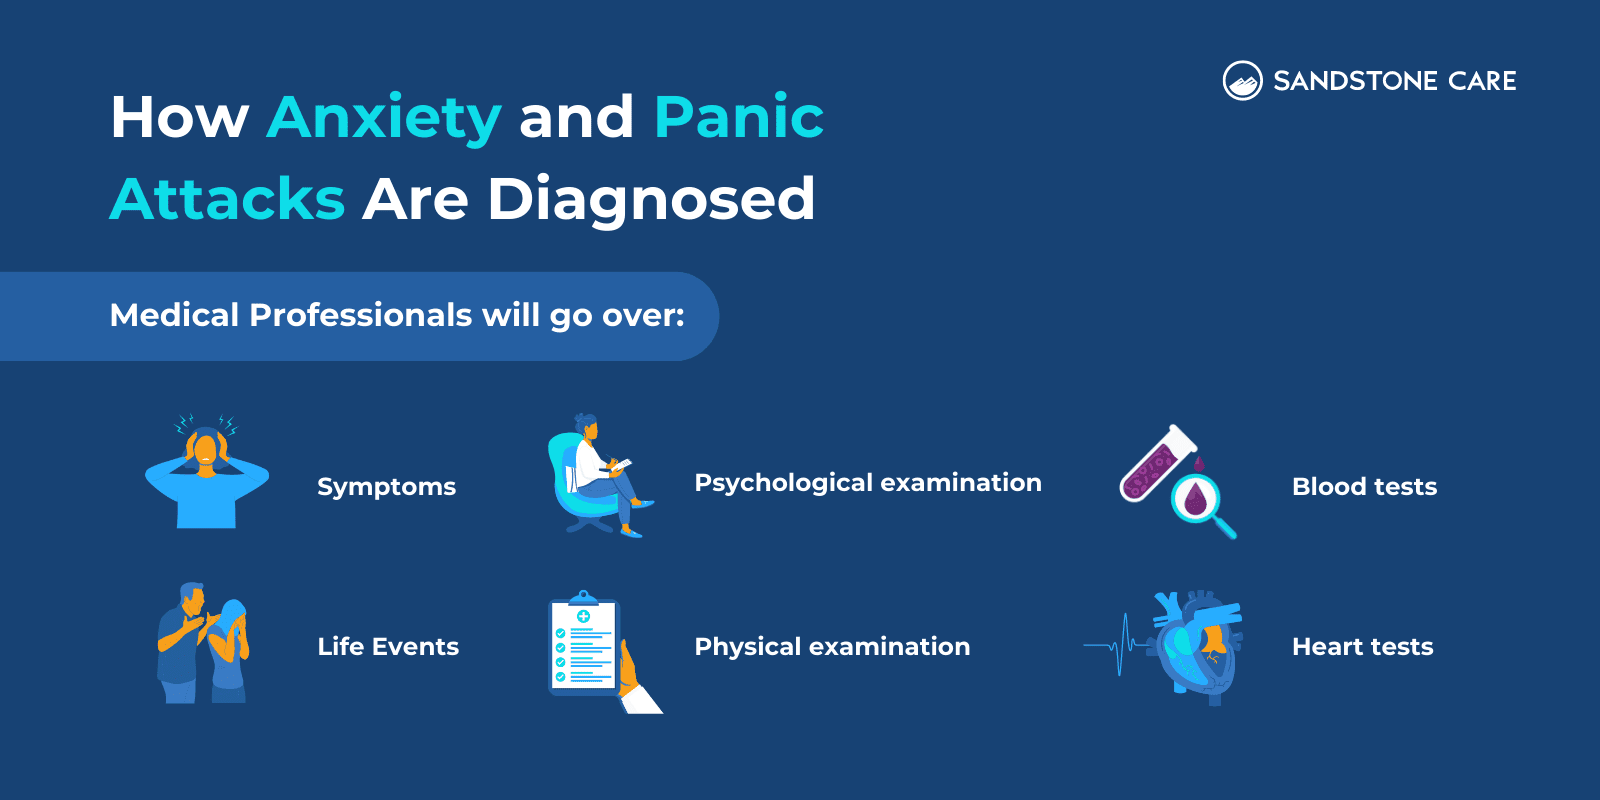 "How Anxiety And Panic Attacks Are Diagnosed" with list of things that medical professionals go over, each represented with relevant graphic